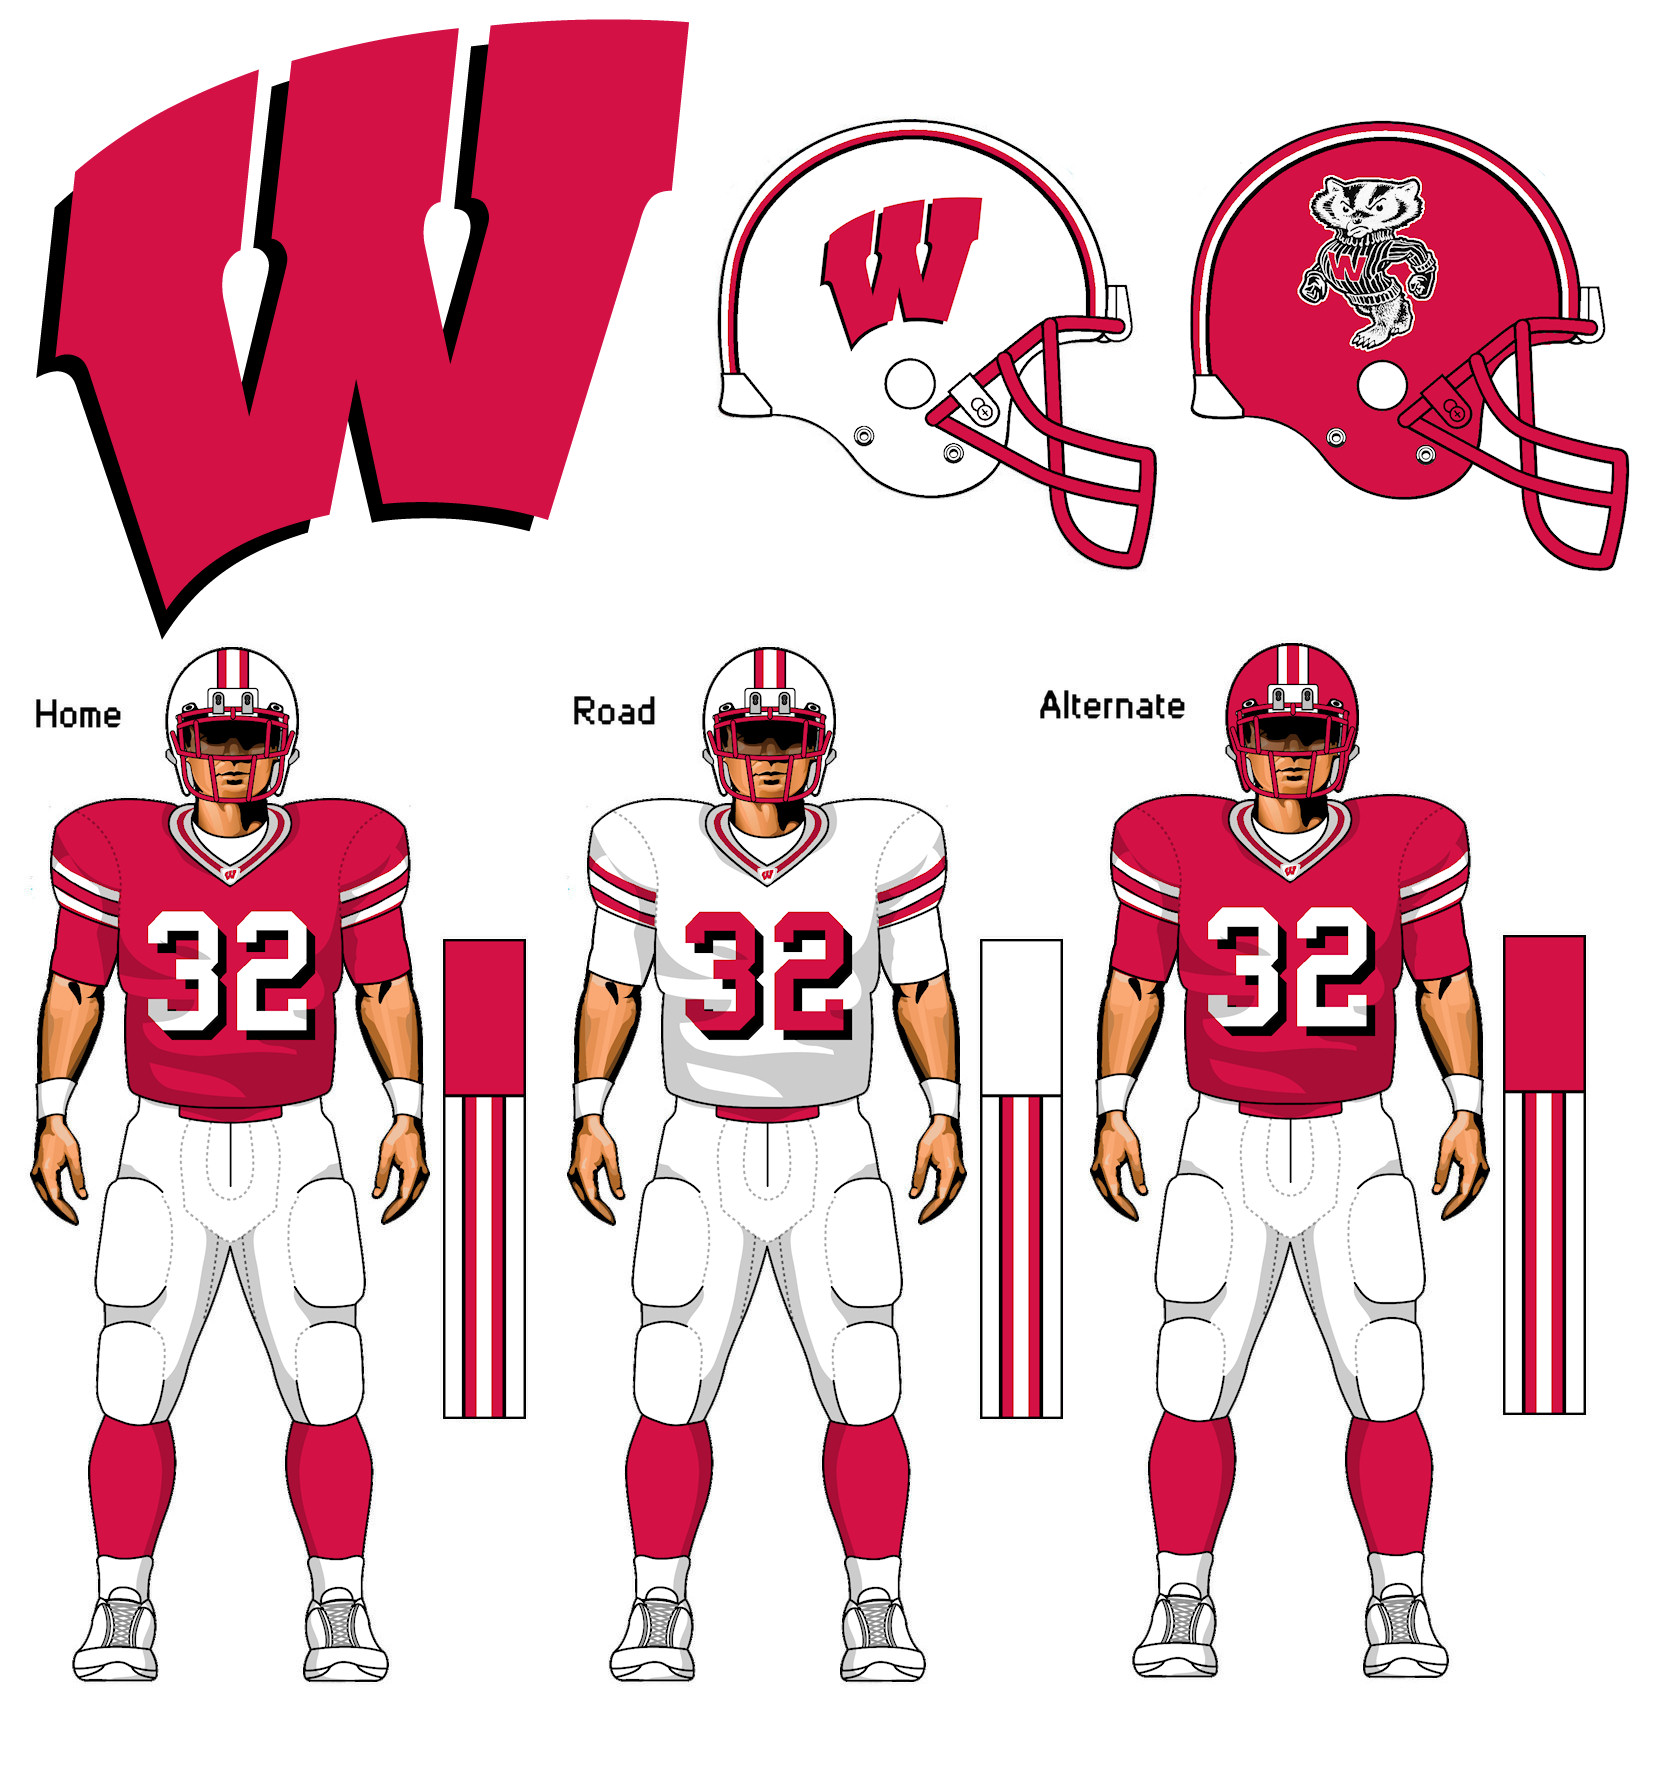 Paul Busts out the 2013 Uni Rankings, THE concepts The B1G 